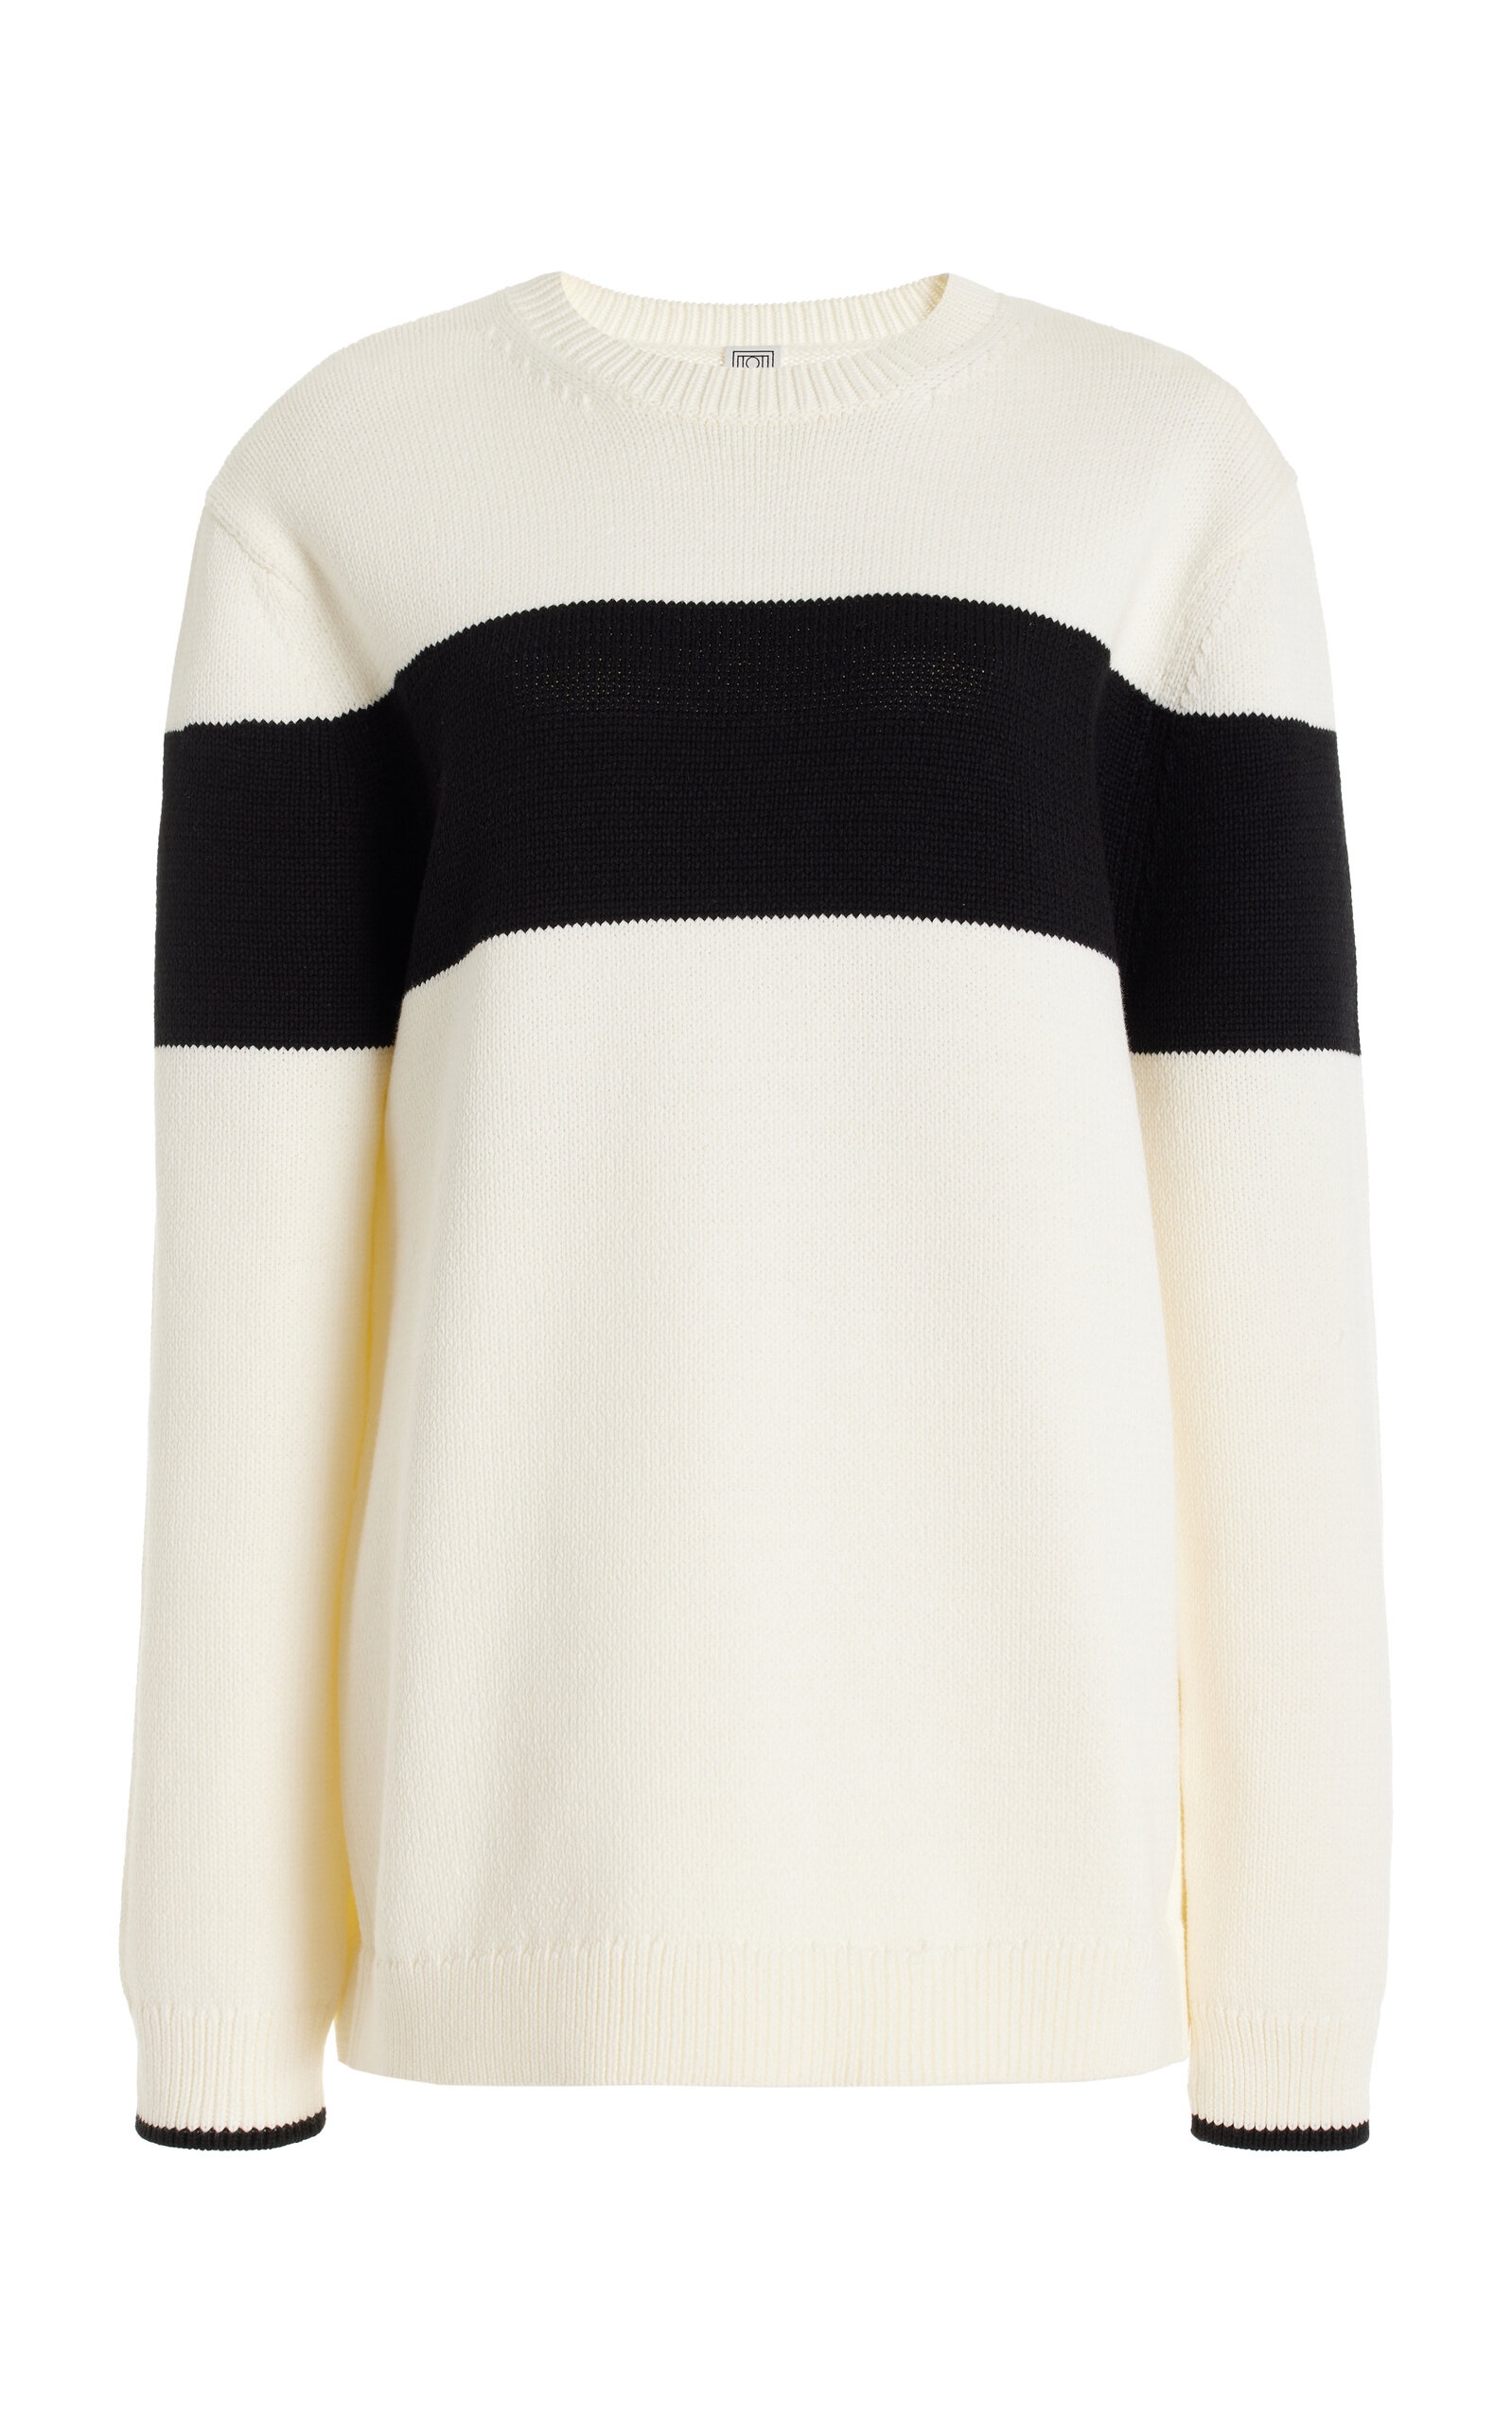 Contrast-Striped Knit Sweater black/white - 1